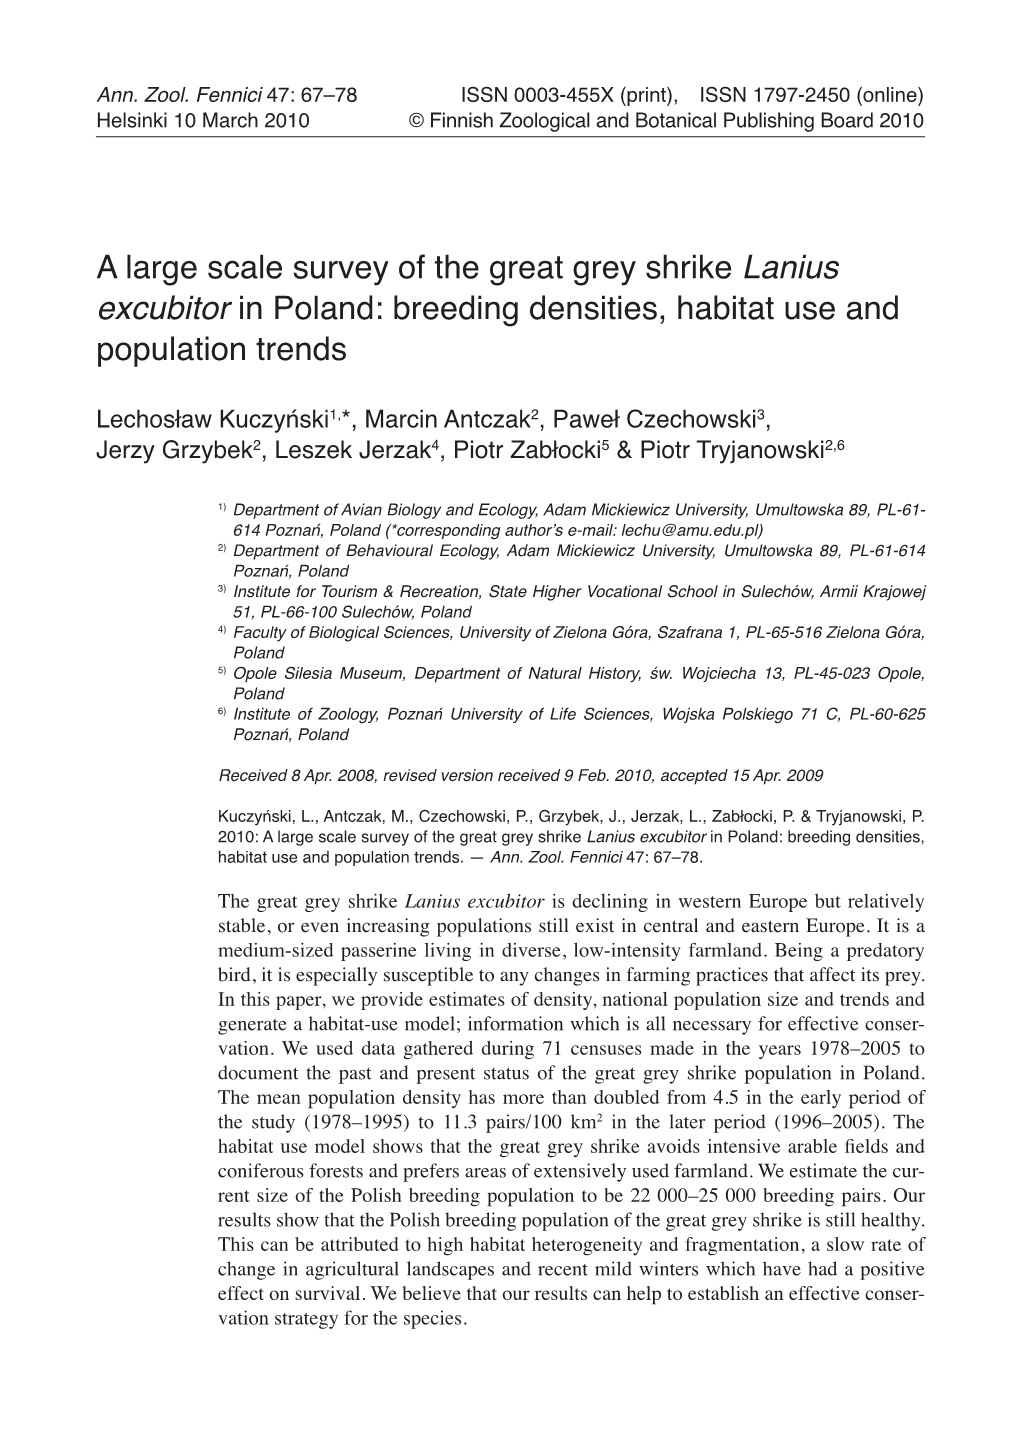 A Large Scale Survey of the Great Grey Shrike Lanius Excubitor in Poland: Breeding Densities, Habitat Use and Population Trends